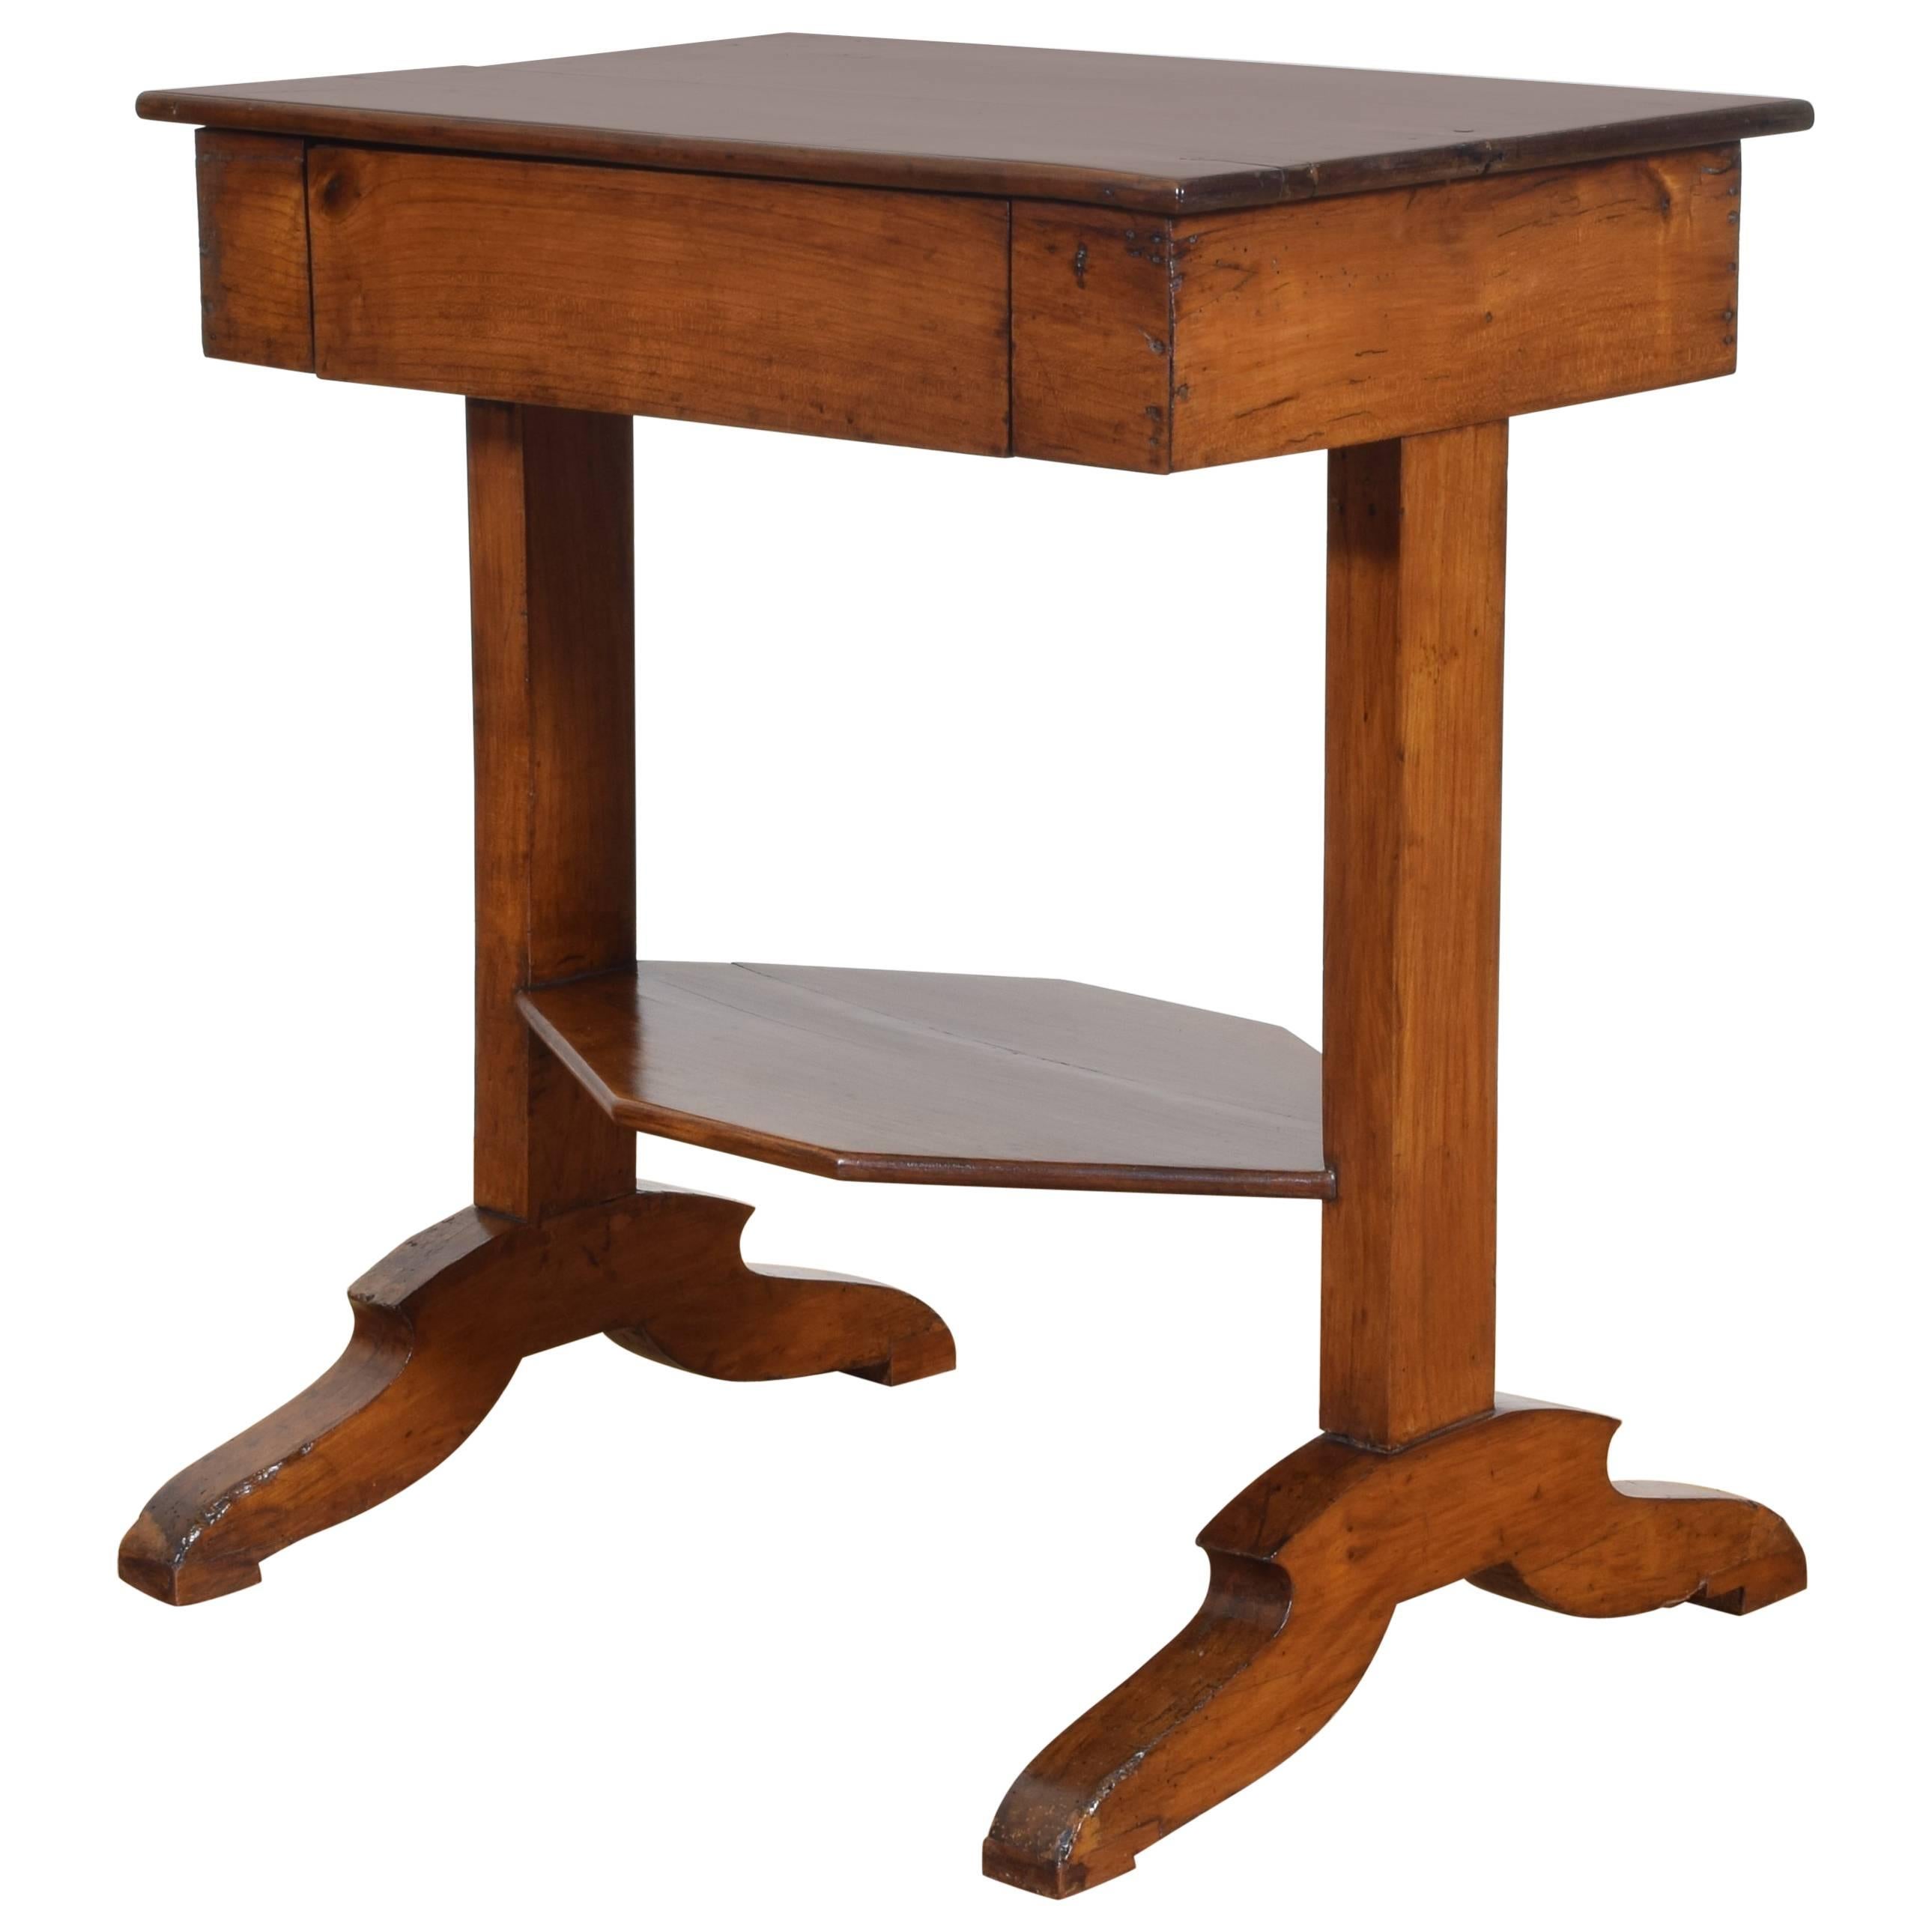 French Restauration Period Cherrywood One-Drawer Side Table, circa 1810-1820